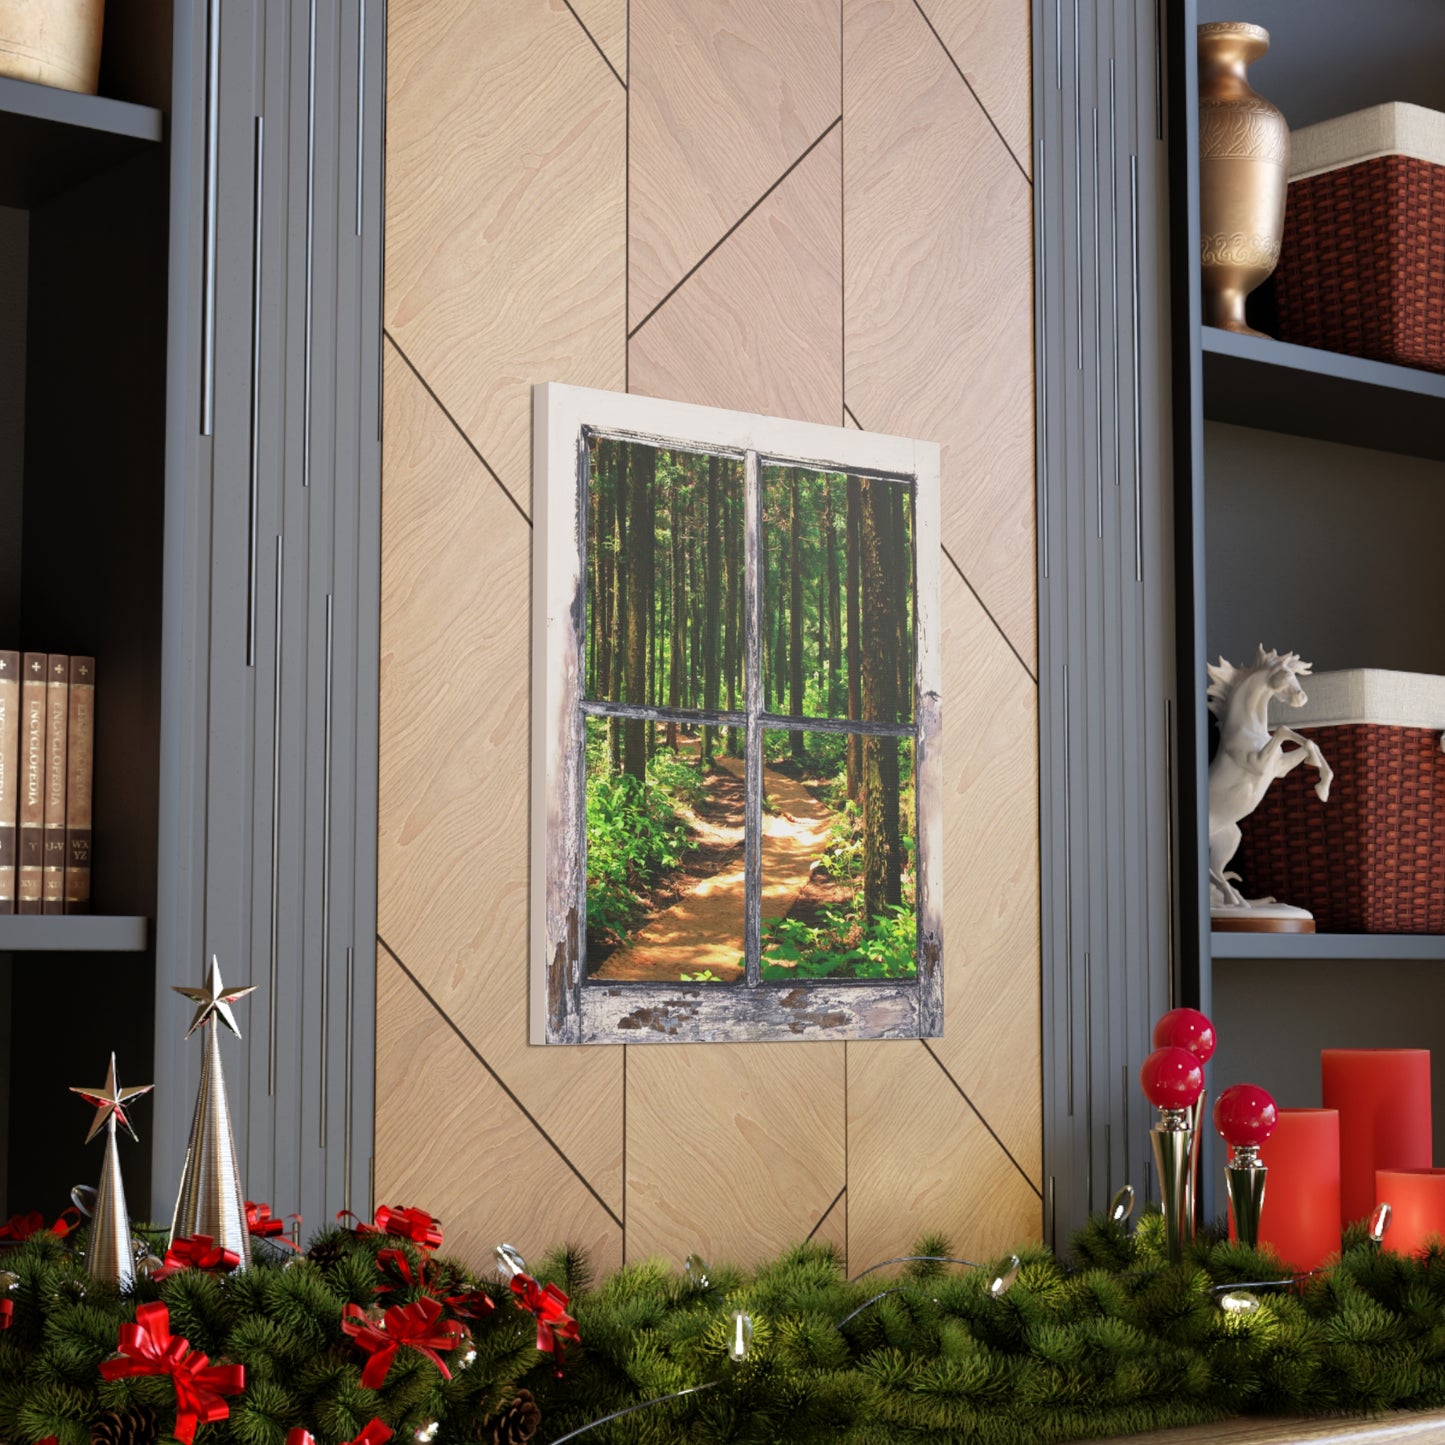 "Natures Window" Wall Art - Weave Got Gifts - Unique Gifts You Won’t Find Anywhere Else!